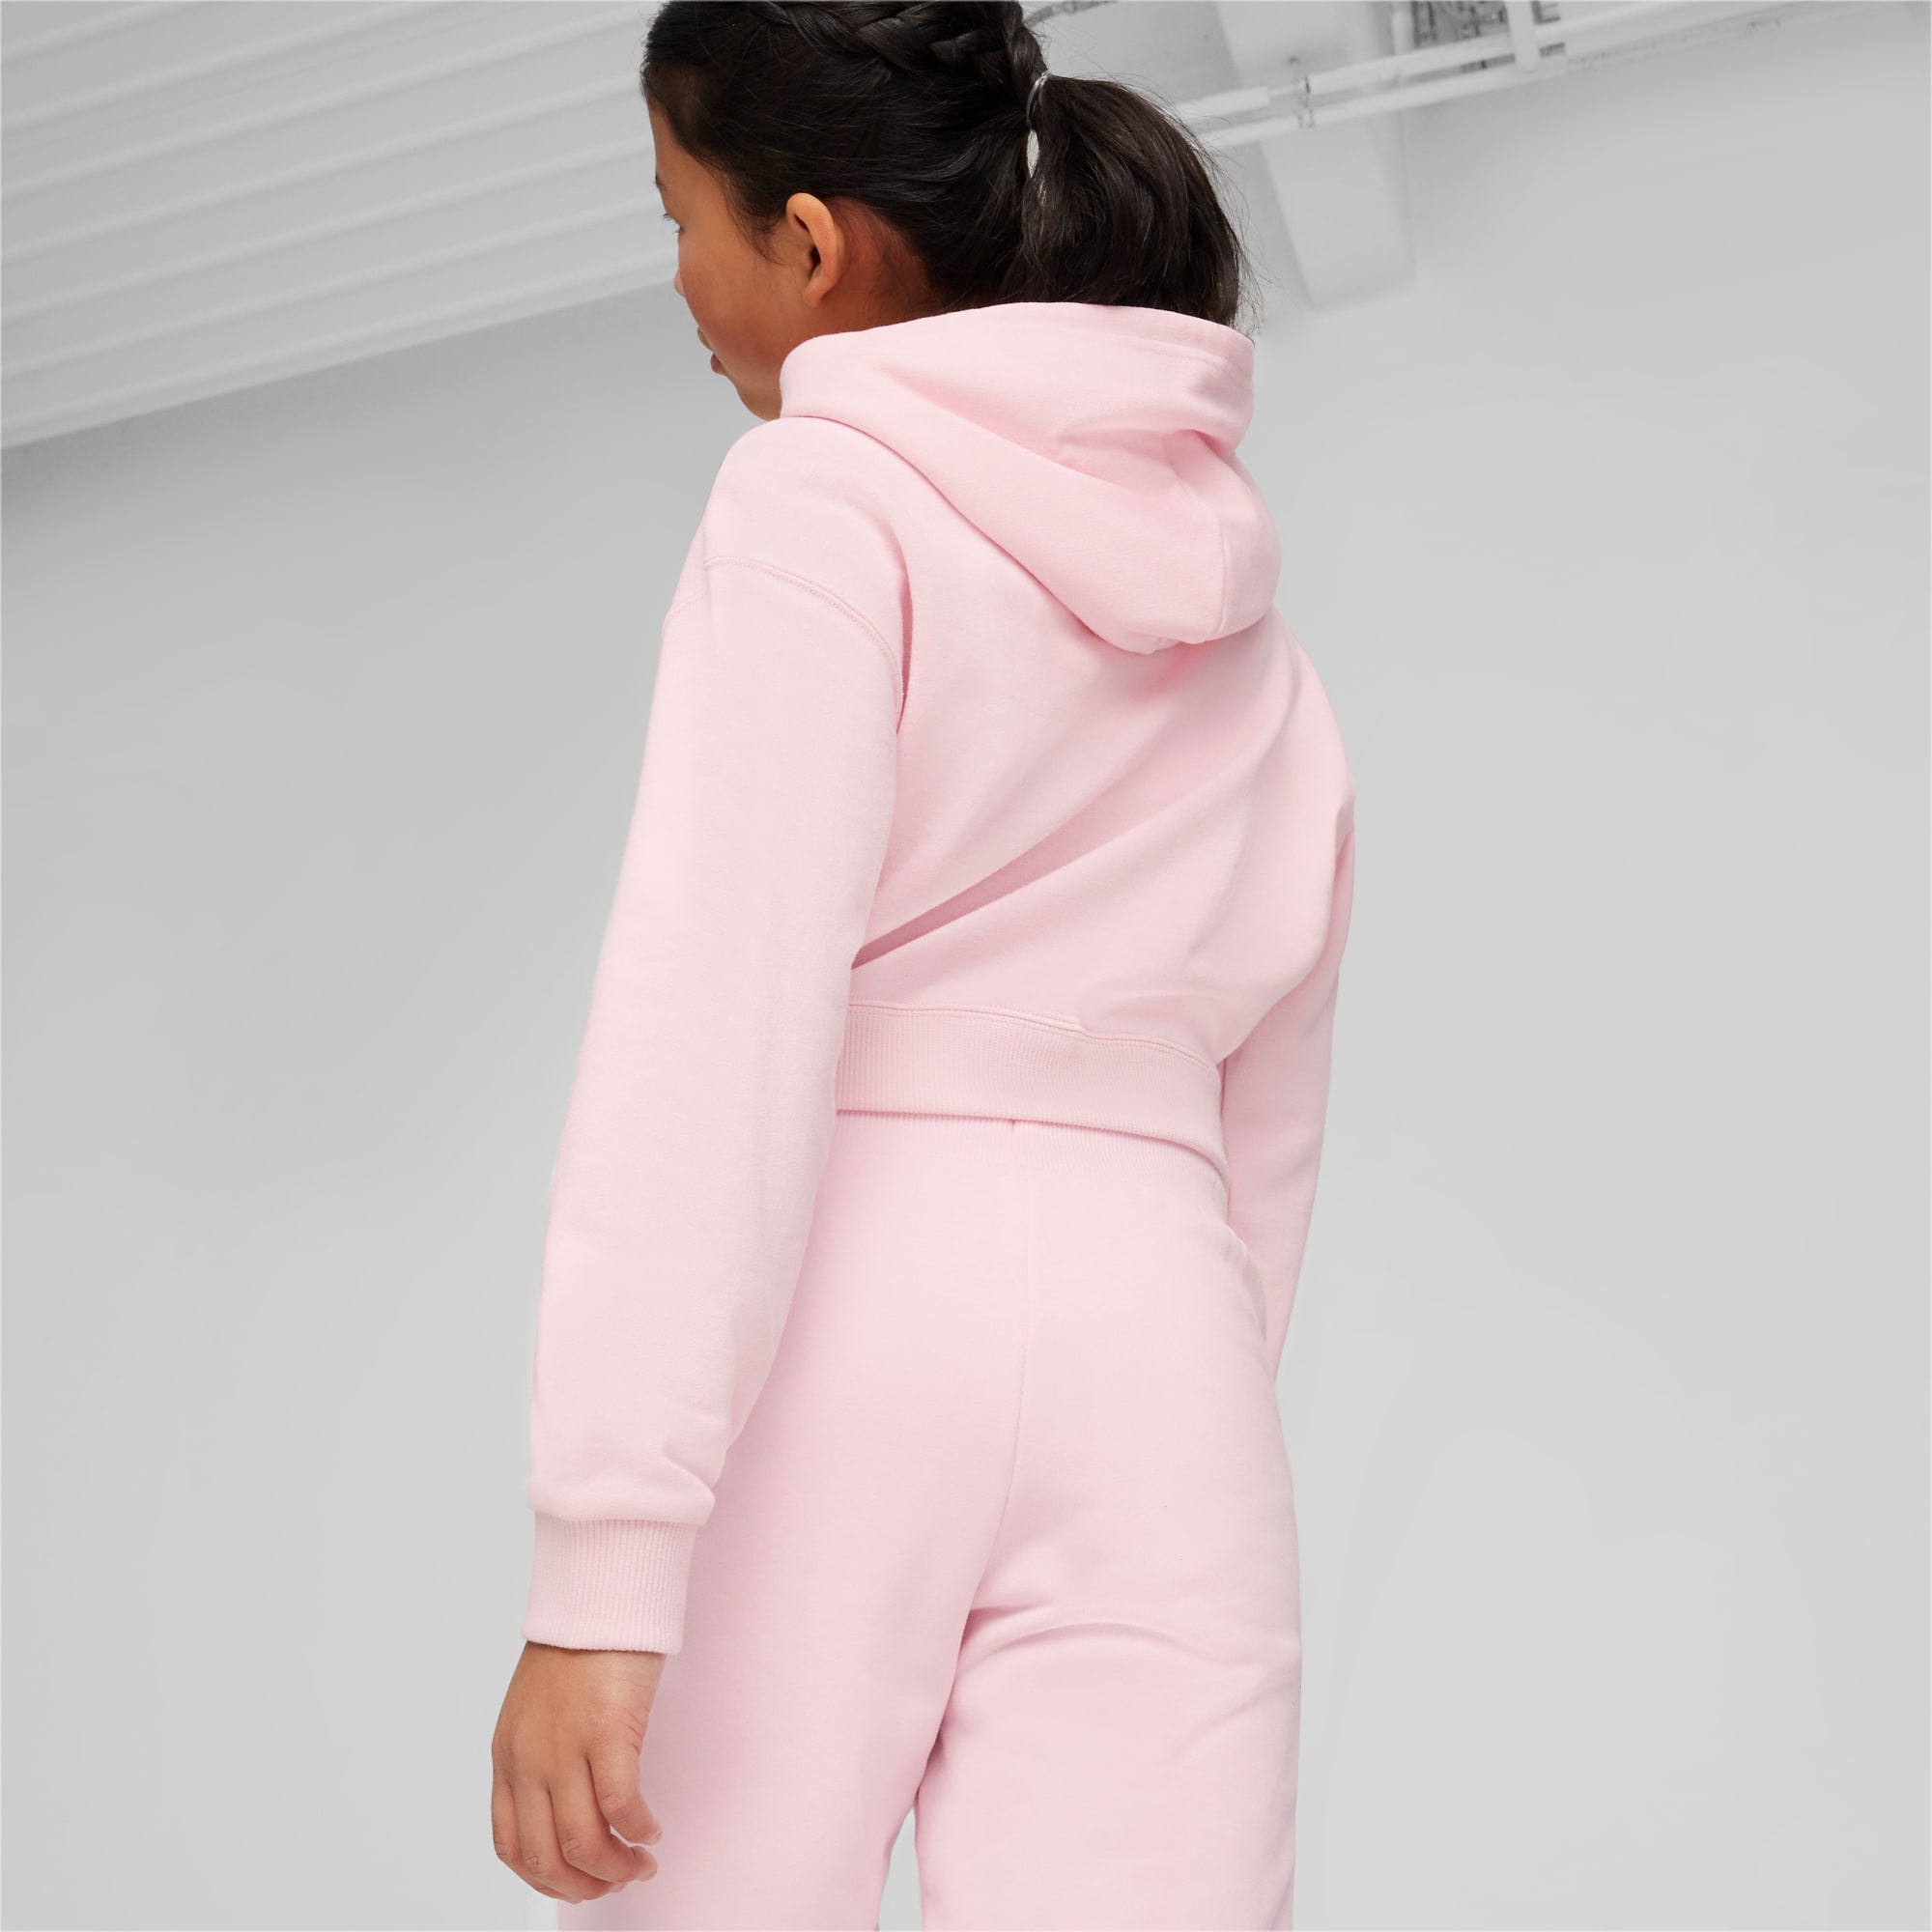 PUMA Better Classics Girls' Hoodie, Whisp Of Pink, Size 128, Clothing